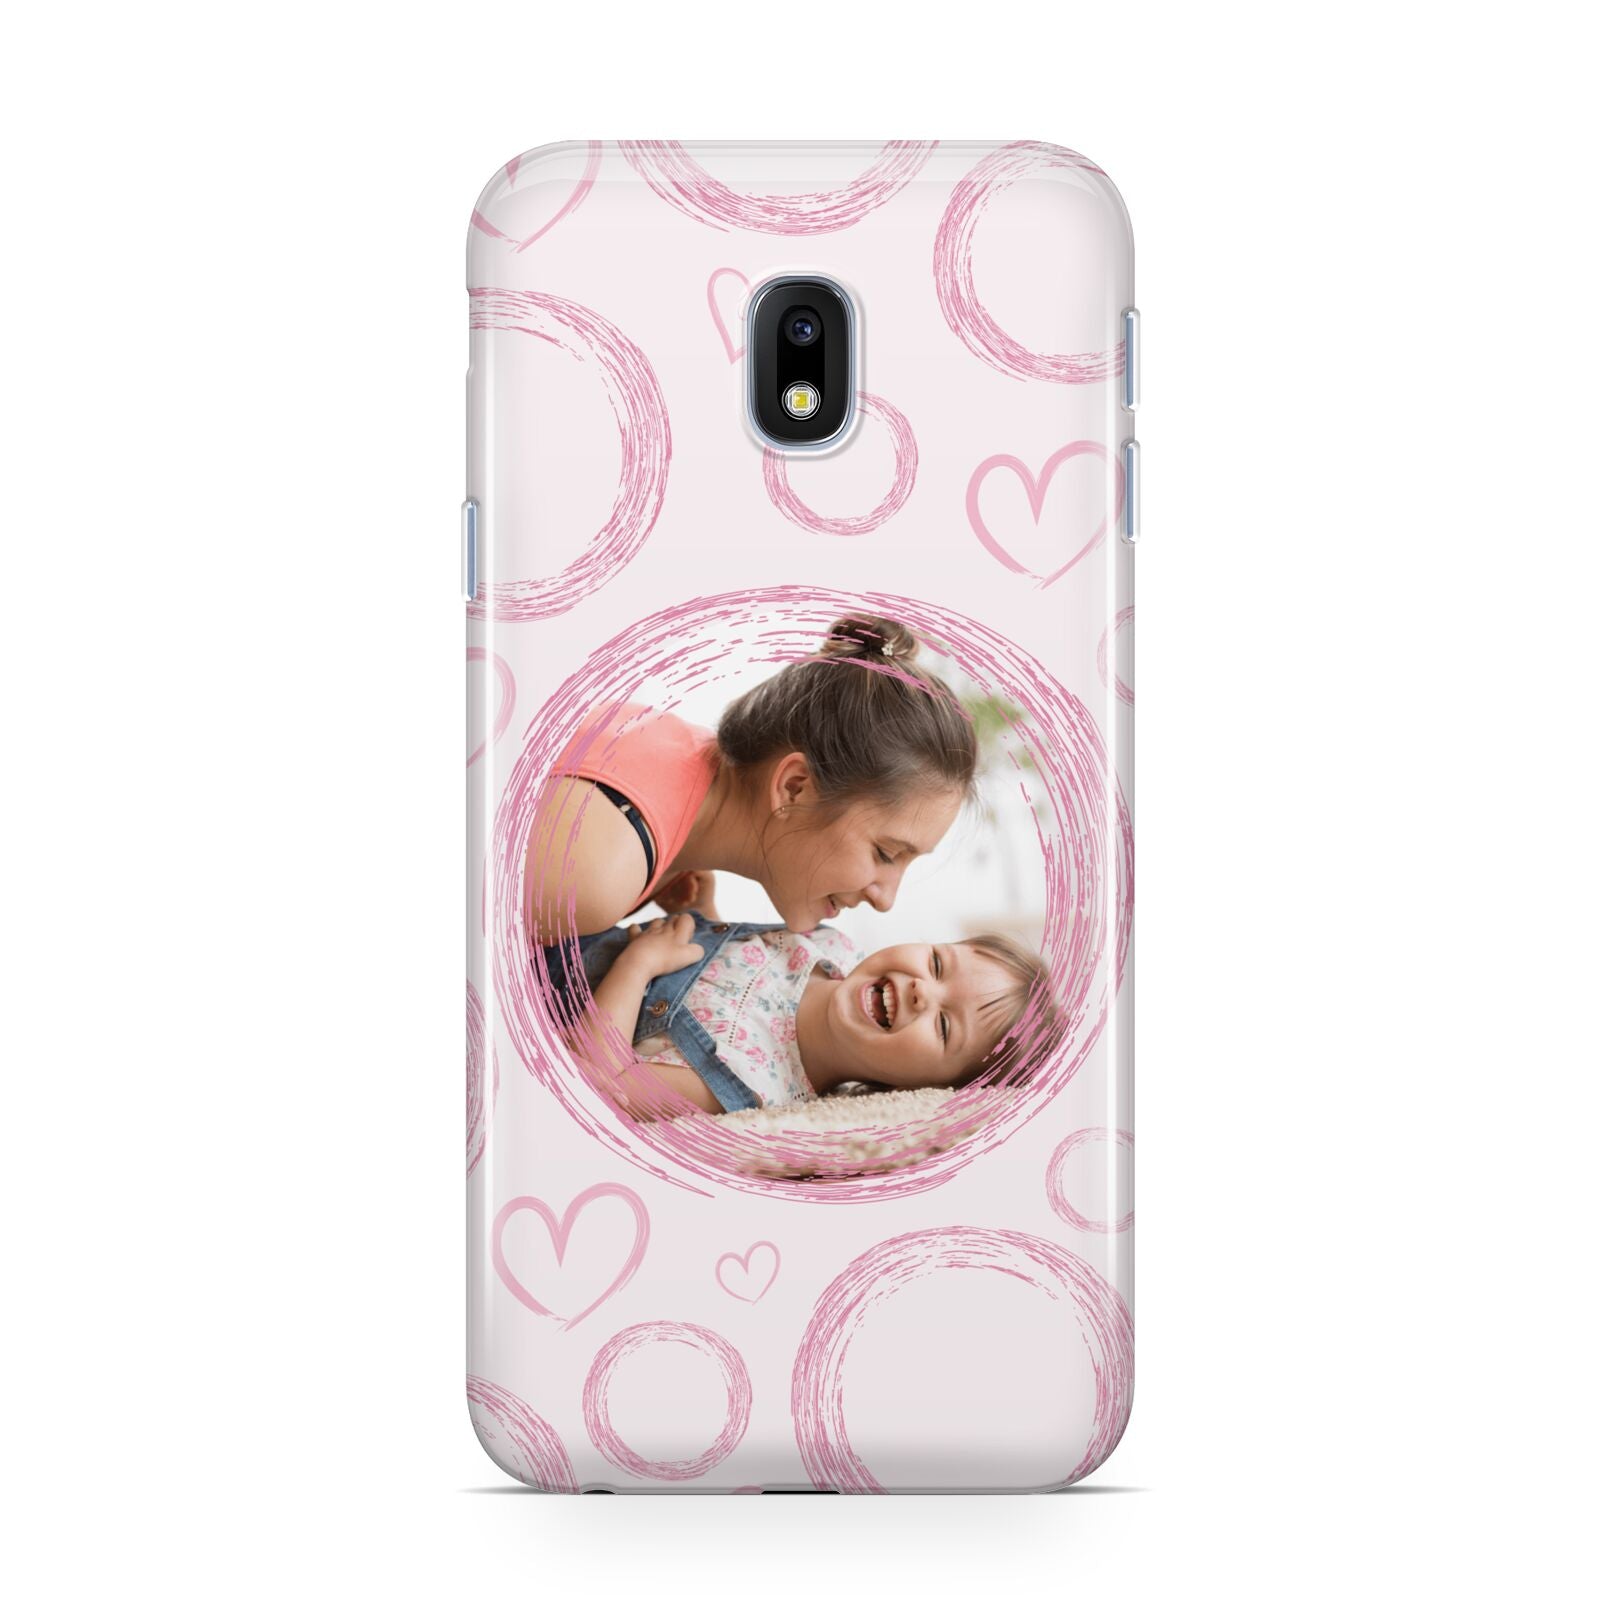 Pink Love Hearts Photo Personalised Samsung Galaxy J3 2017 Case